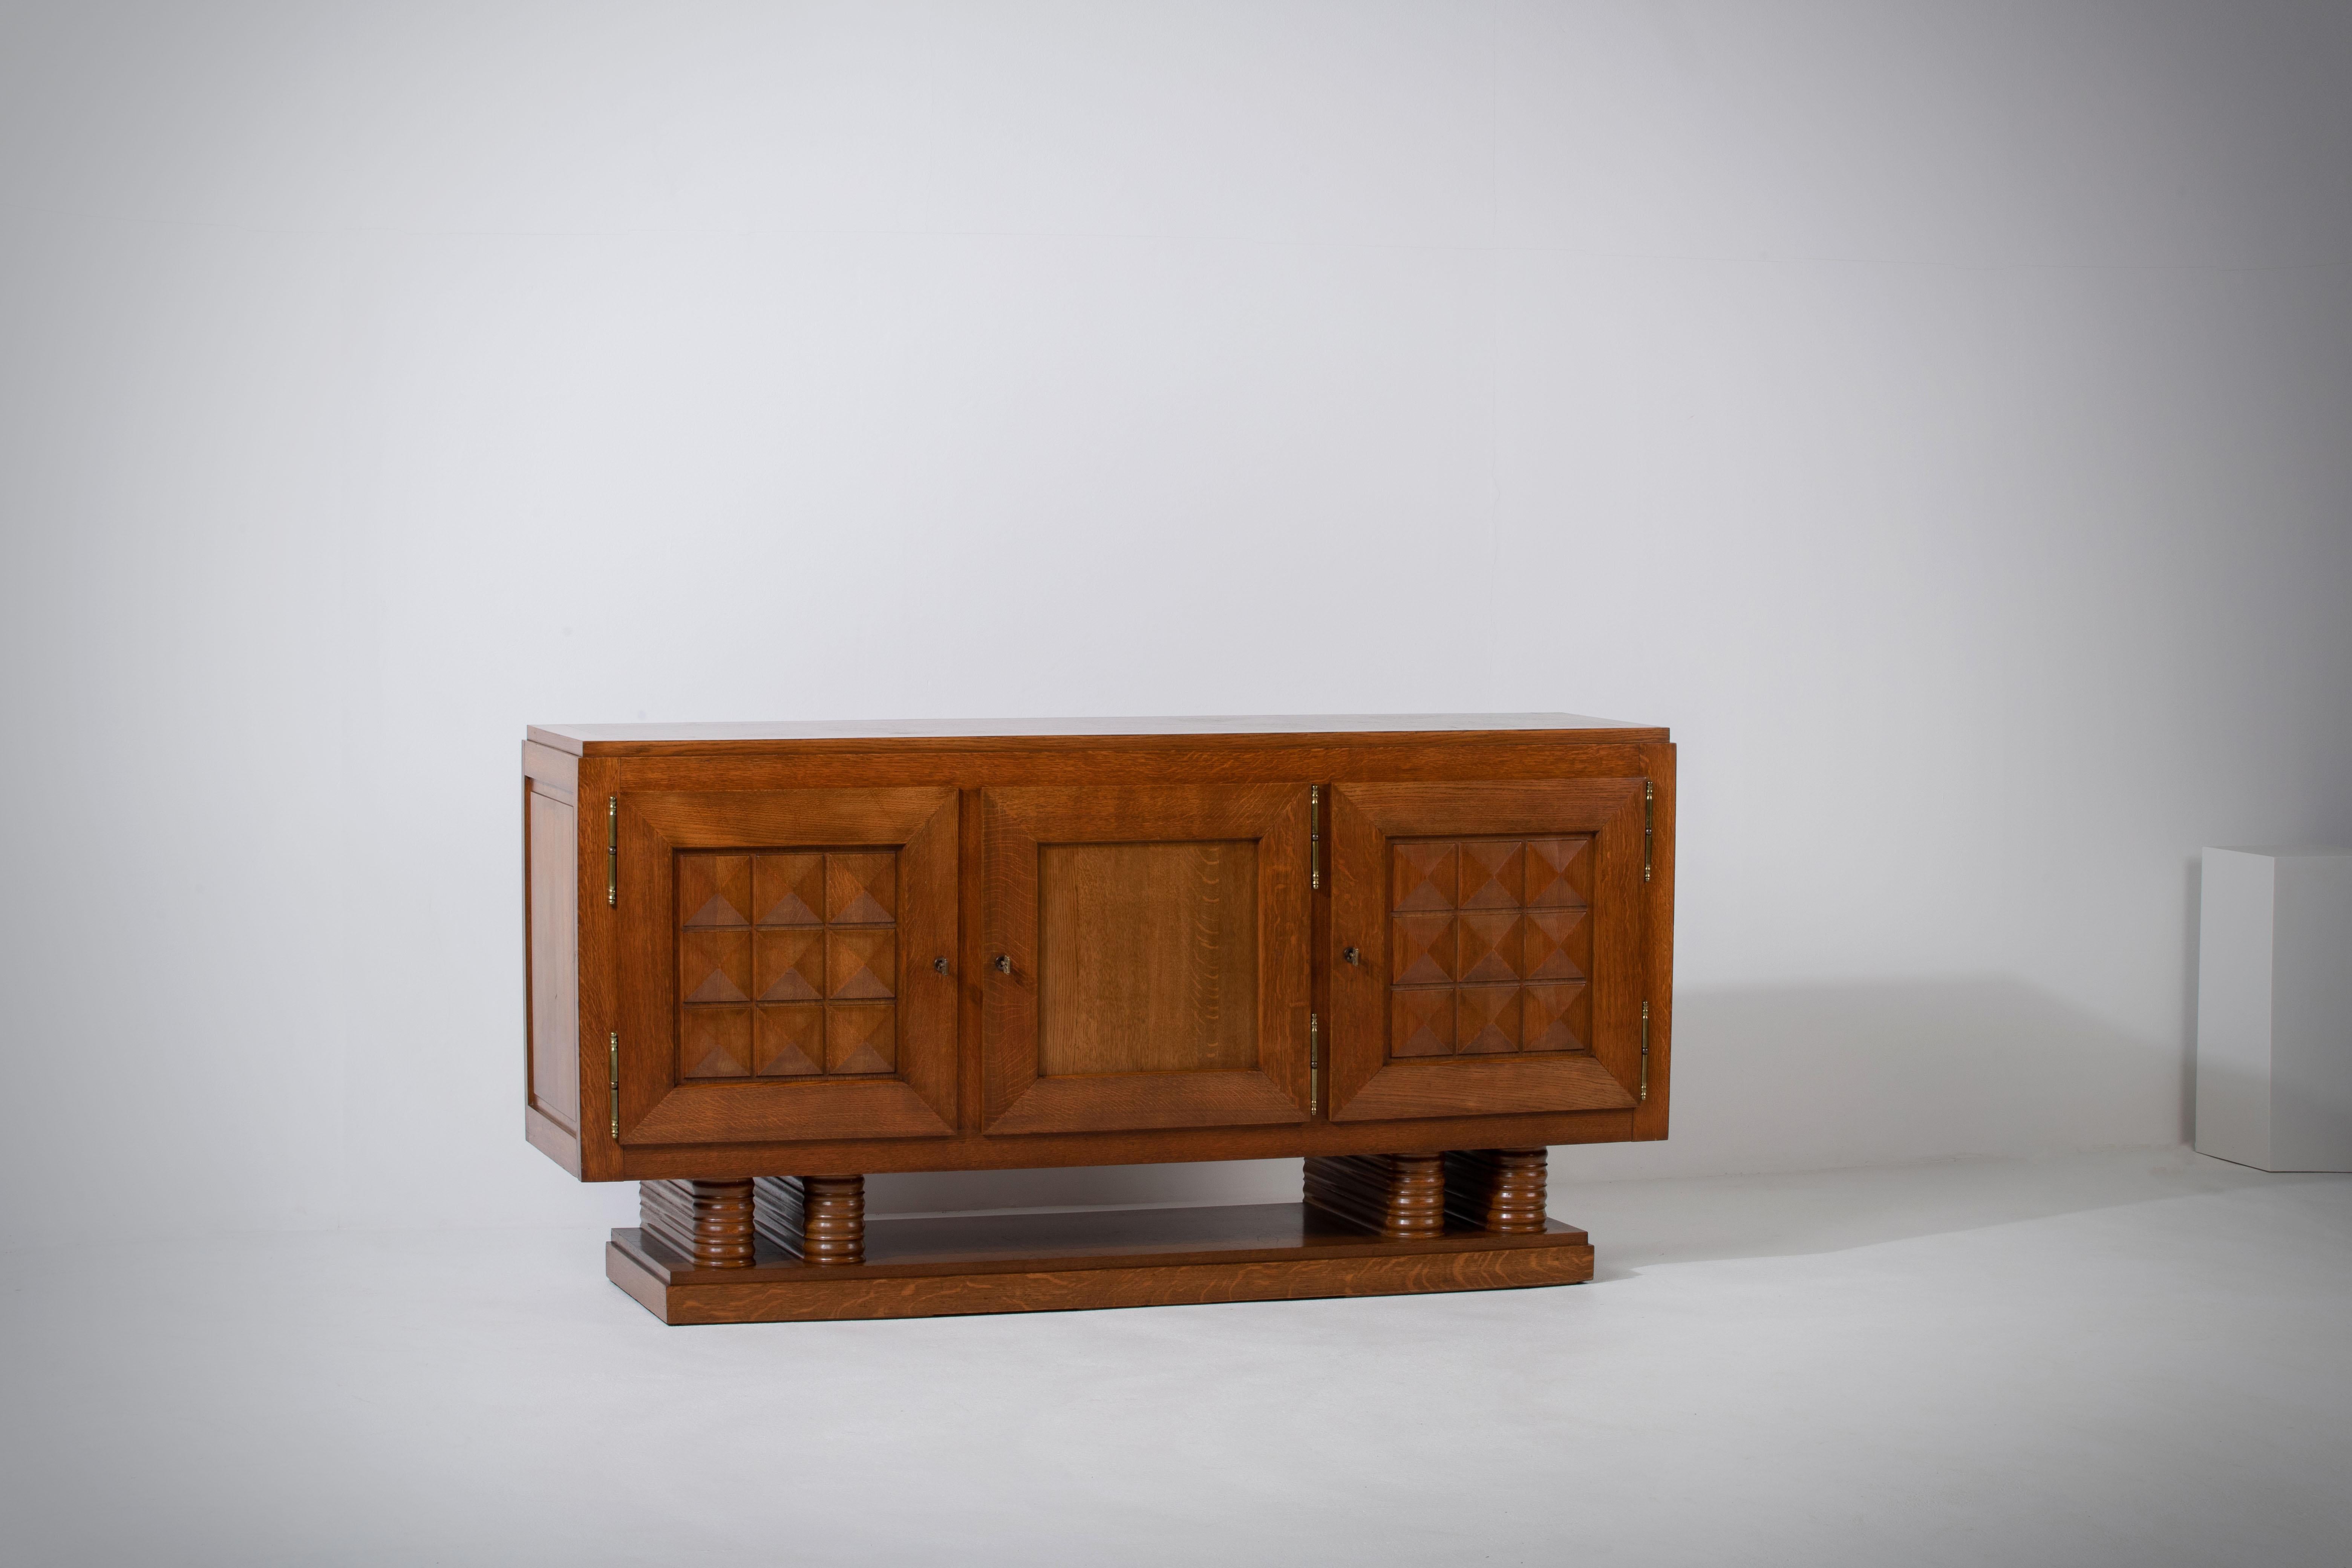 Introducing an extraordinary one-of-a-kind oak sideboard designed by the renowned French designer Gaston Poisson in the 1940s. Gaston Poisson was a prominent furniture designer in the early to mid-20th century, known for his remarkable